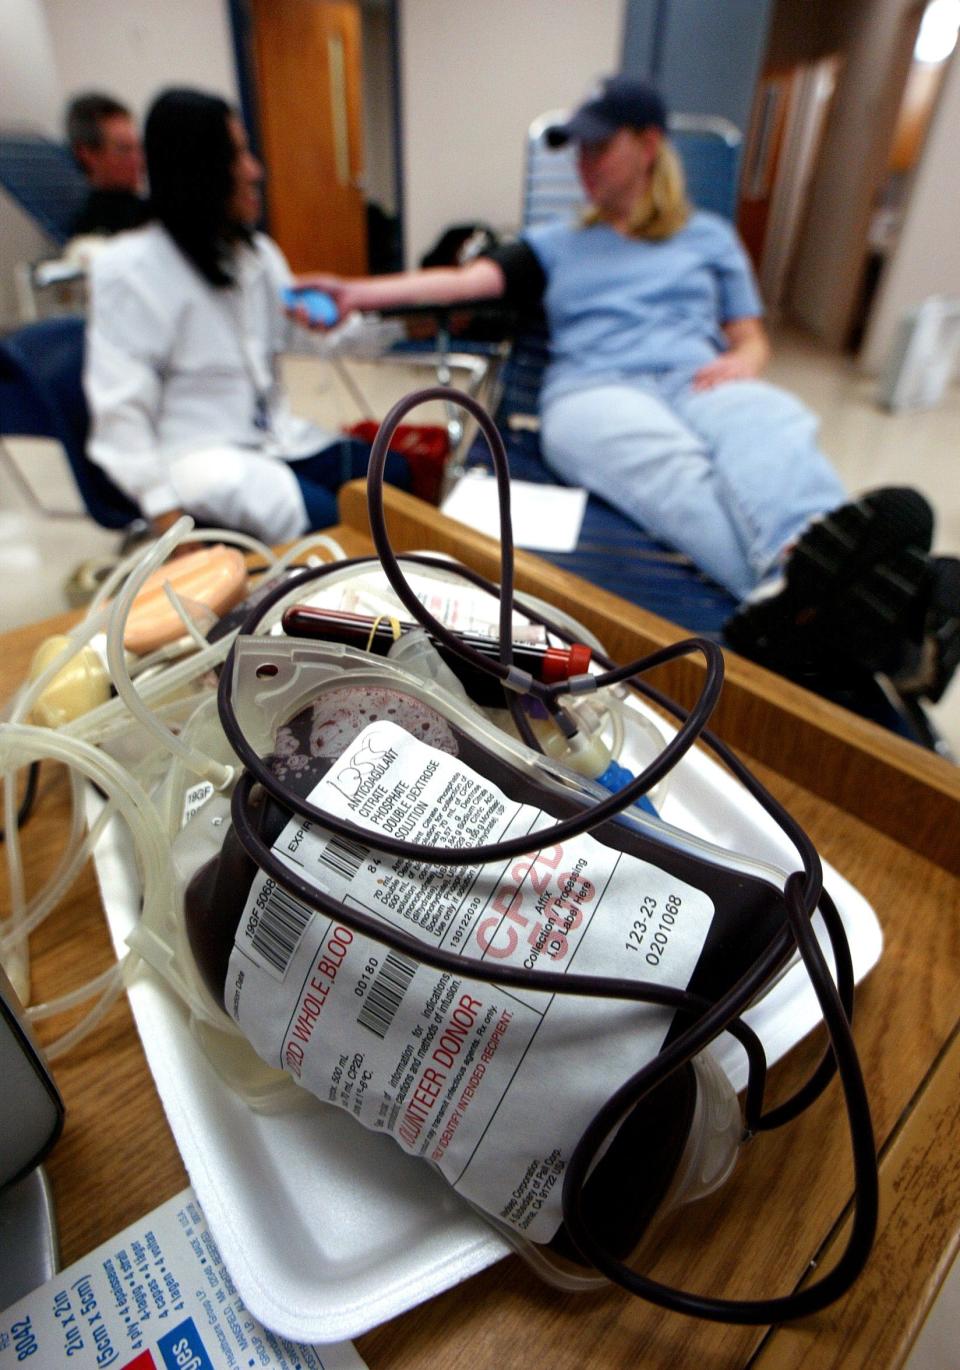 One unit of donated blood can save up to three lives, according to Theresa Young, executive director of the American Red Cross Delmarva Chapter.